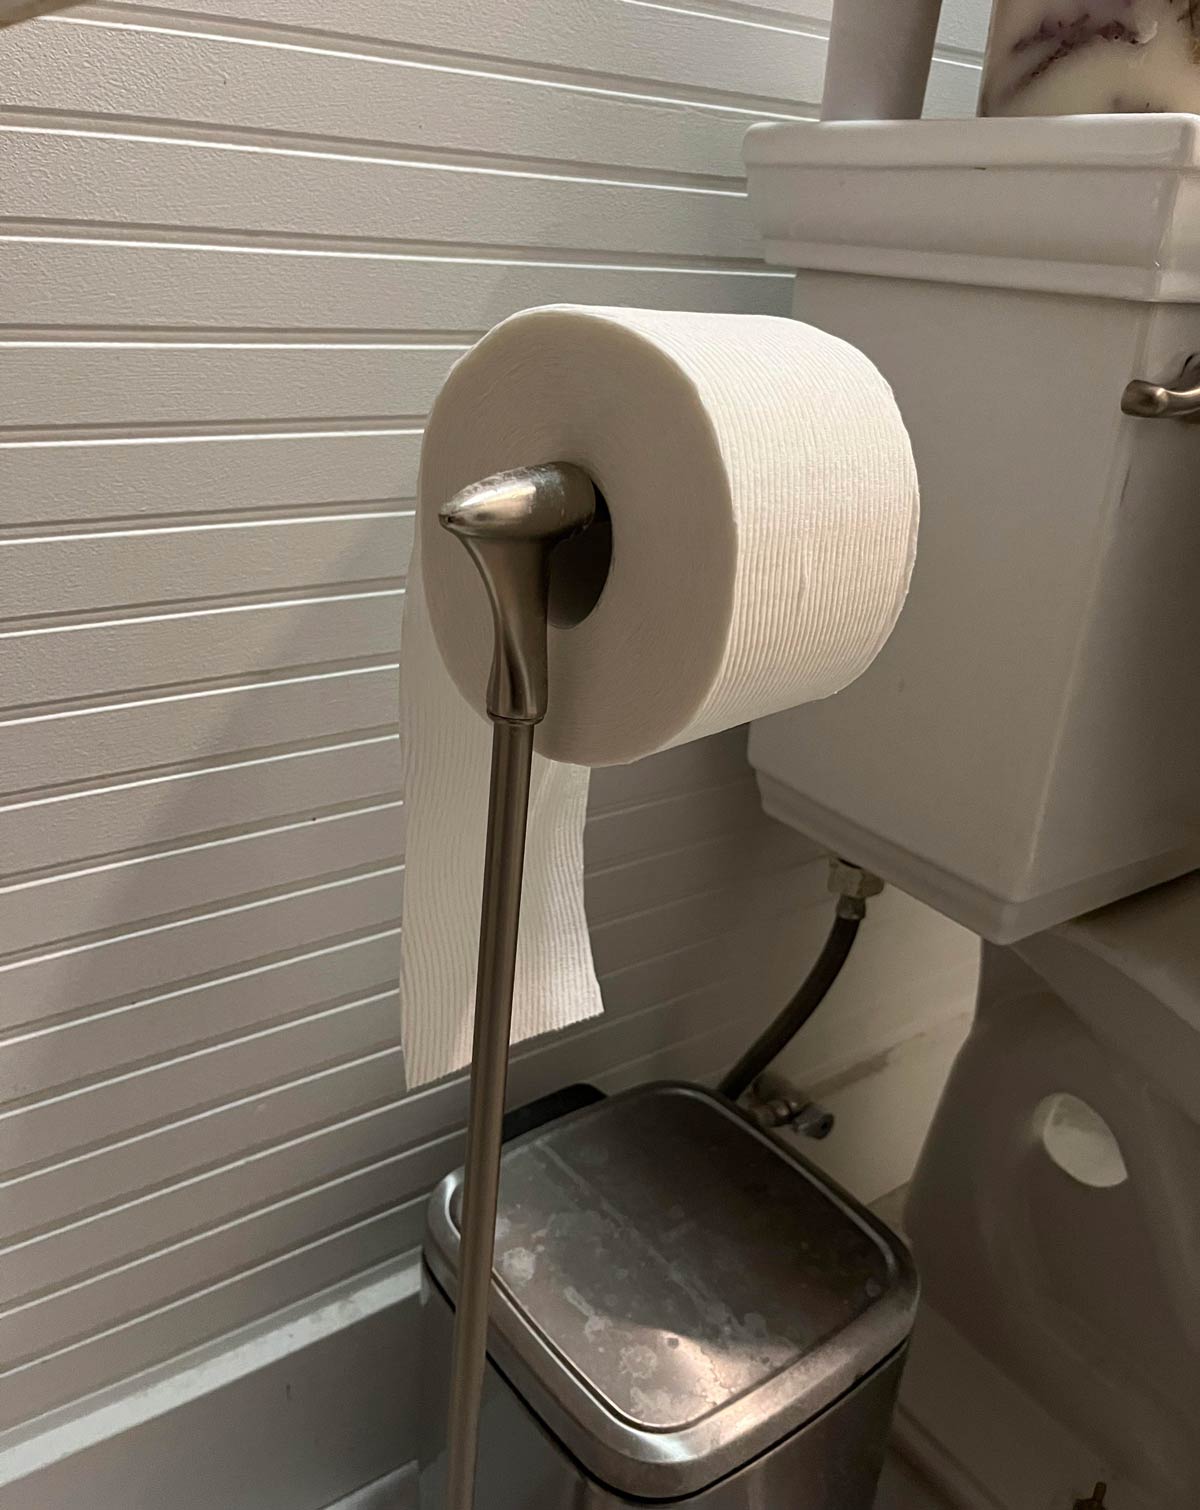 Had a girl I really like over — She Replaced the TP roll for me